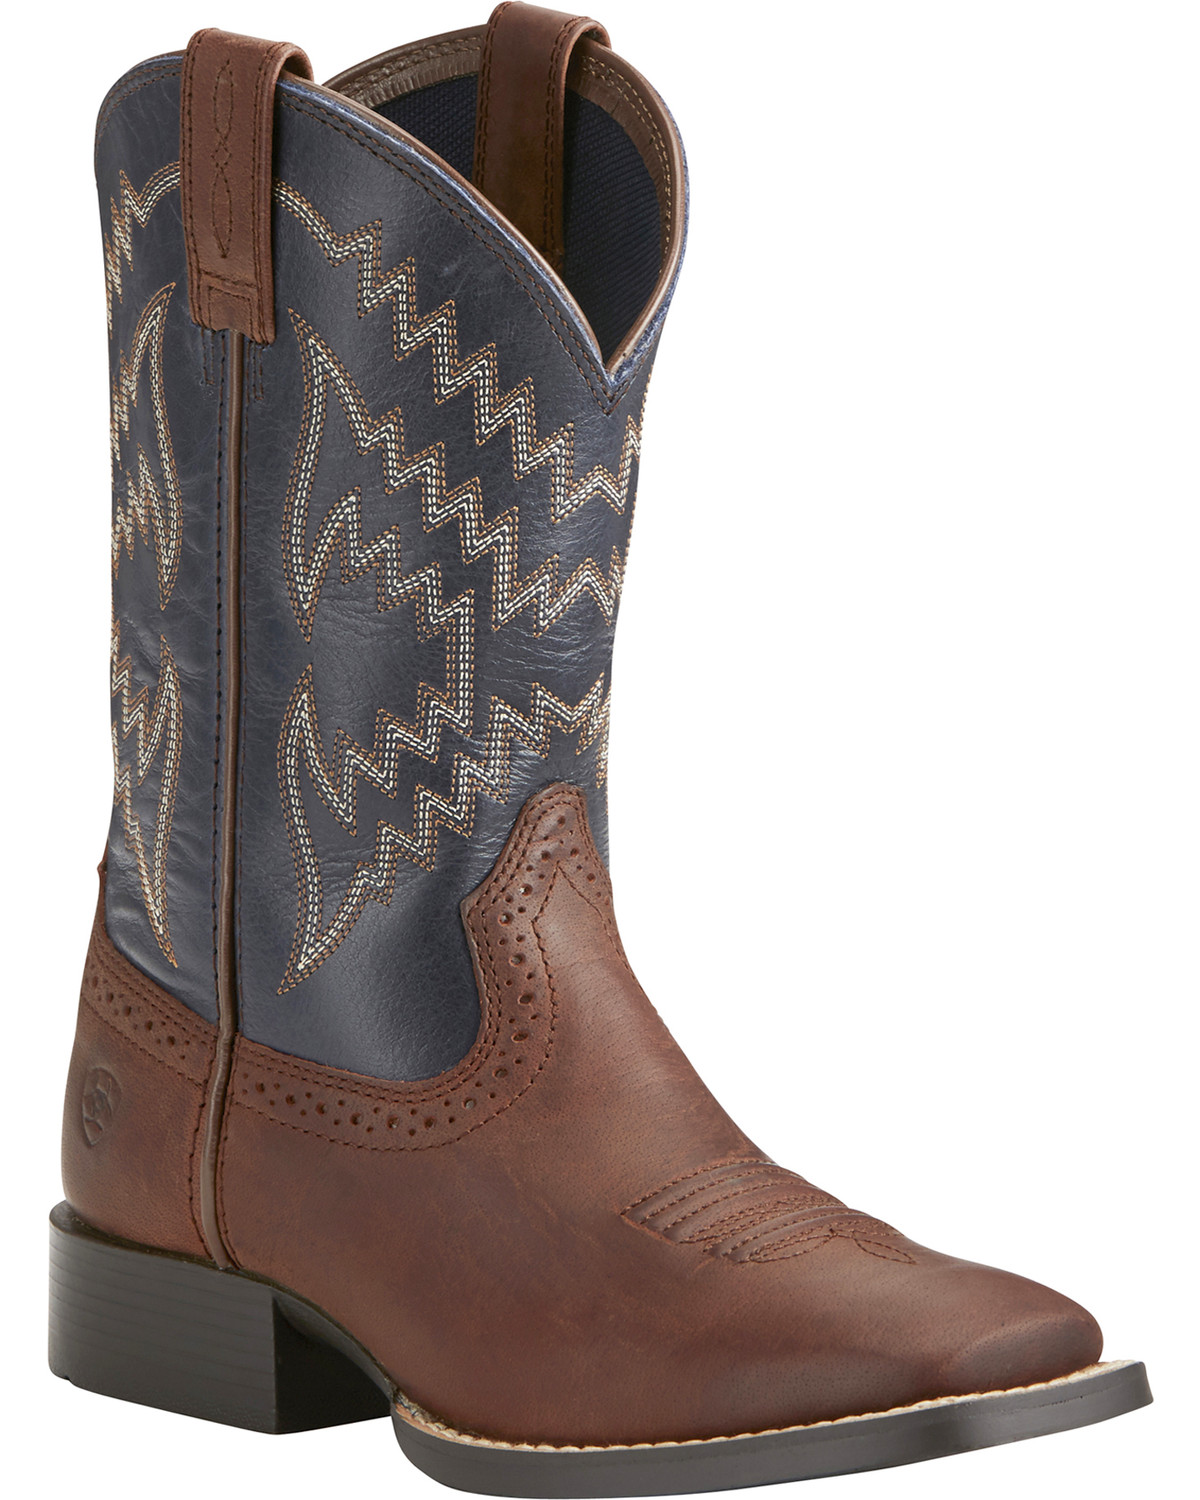 Ariat Youth Boys' Tycoon Western Boots